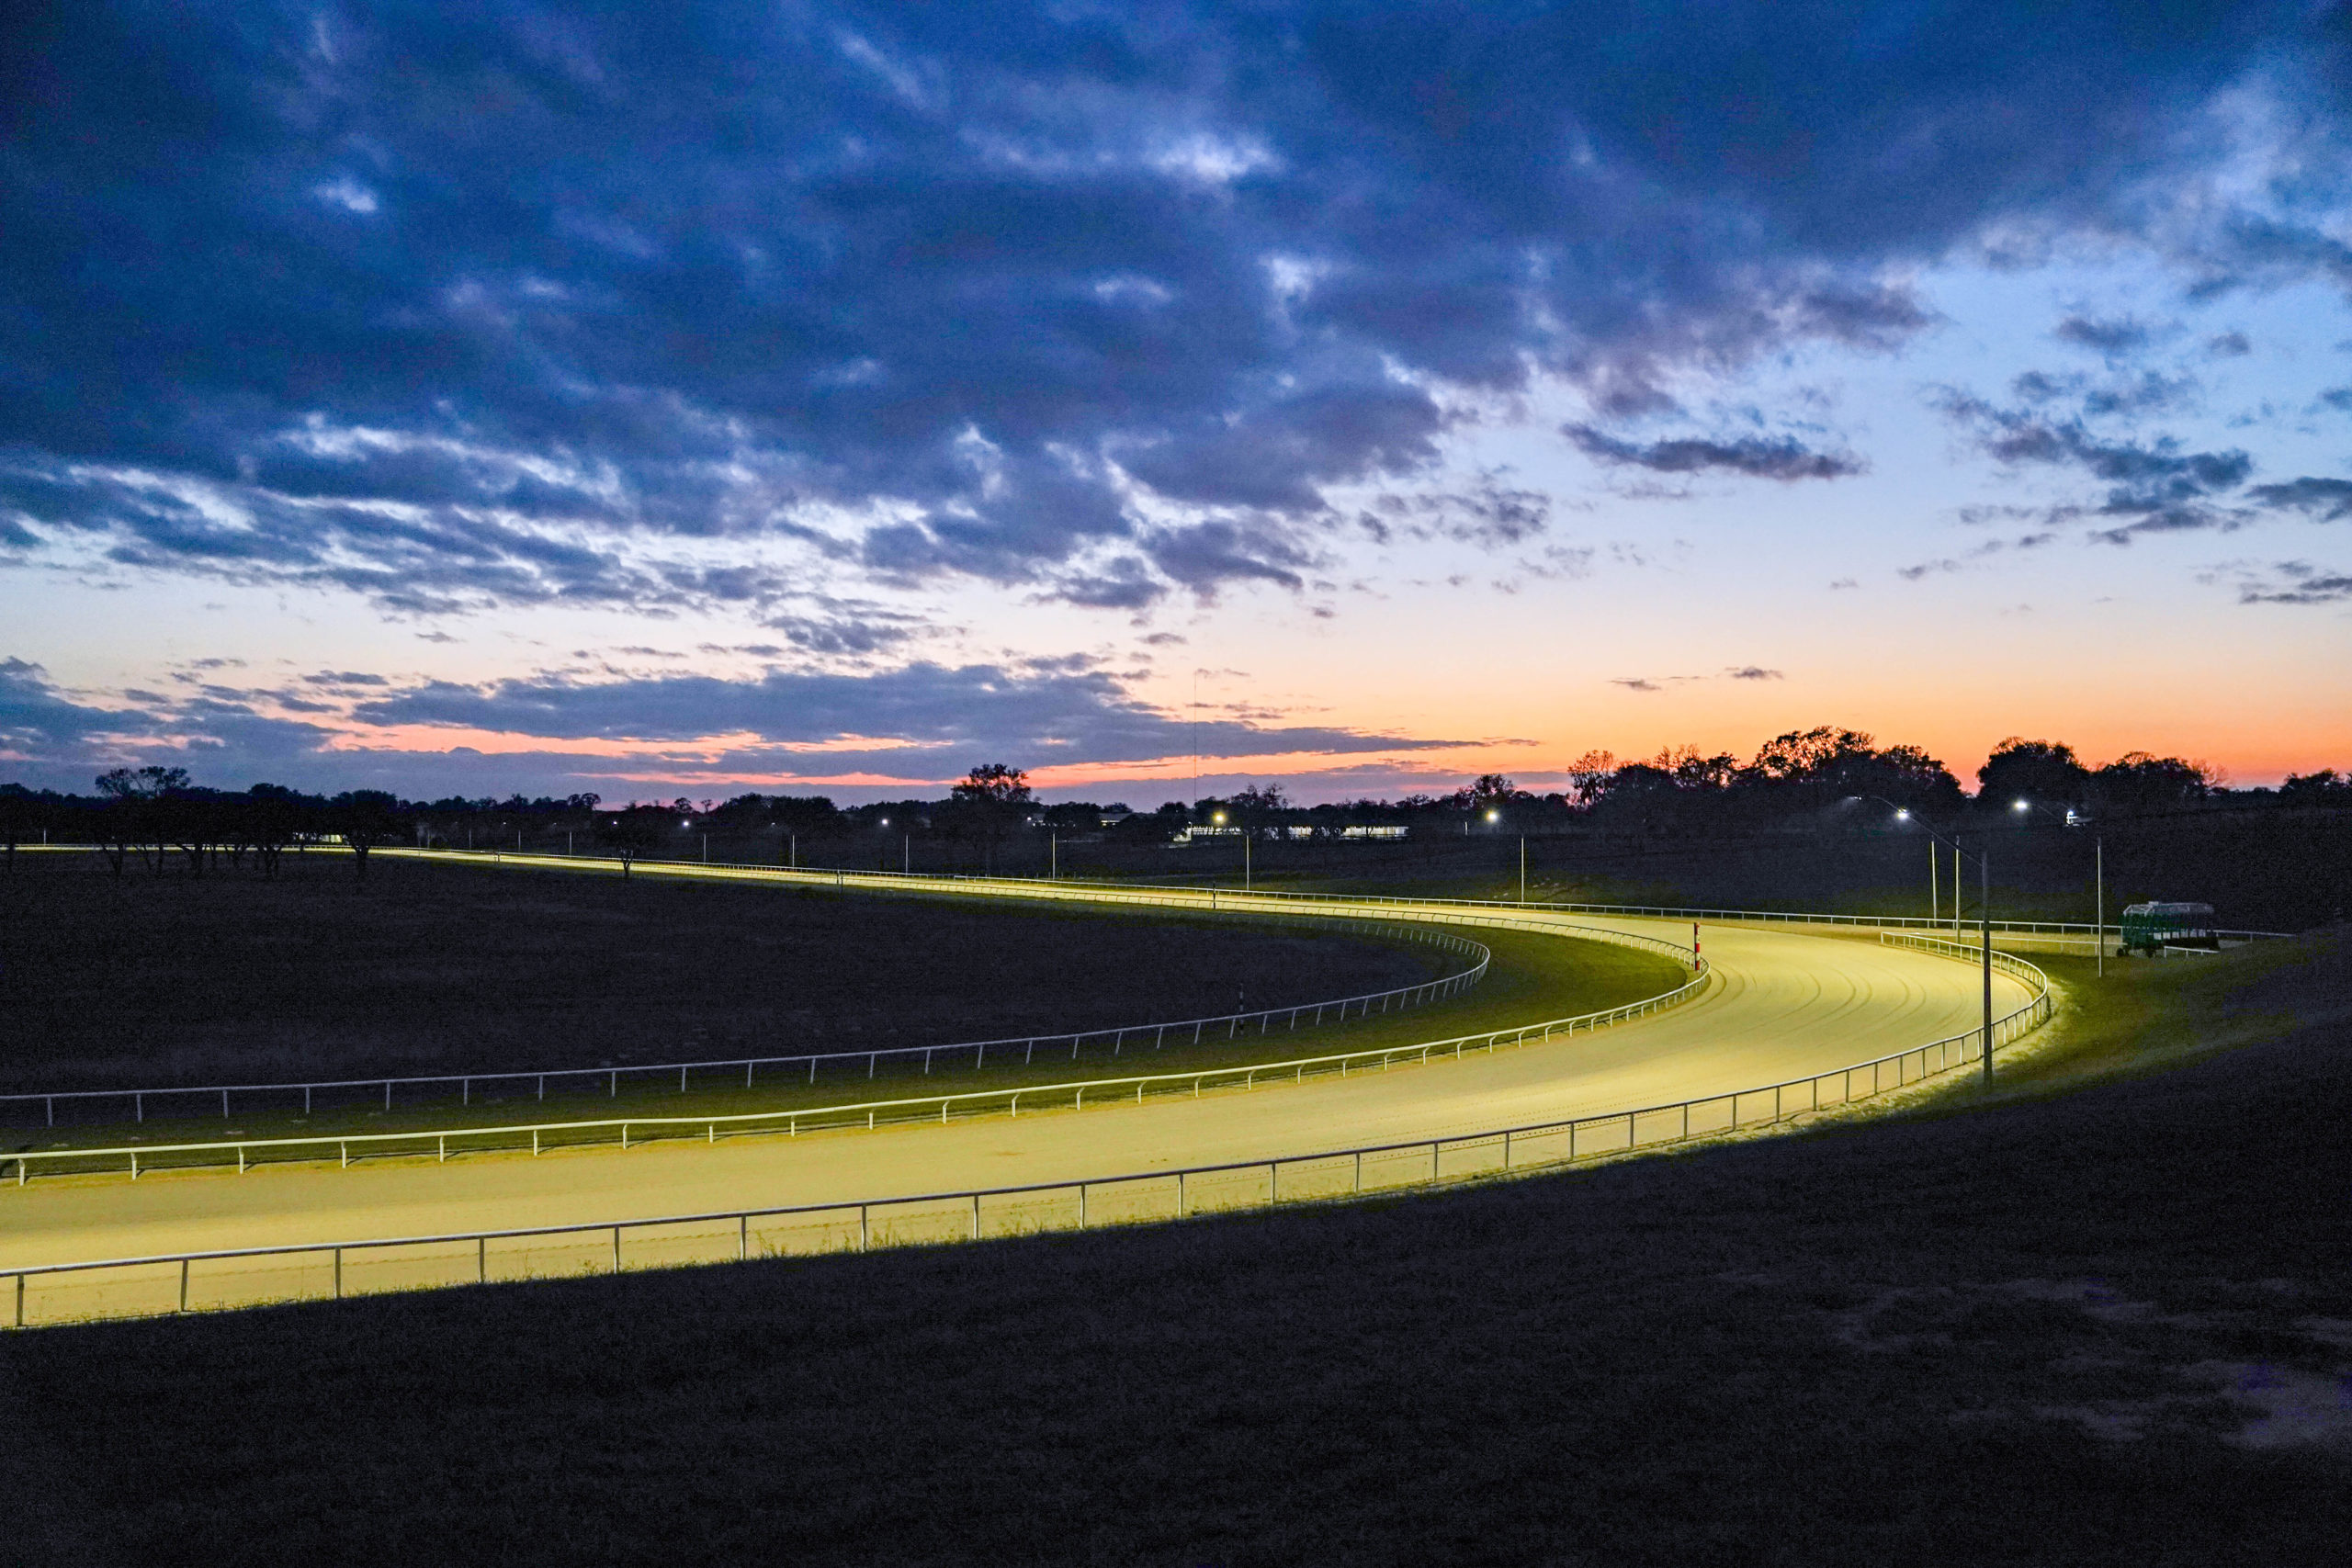 The fully lighted one-mile dirt track at oak ridge training center is perfect for getting in training hours before the sun comes up